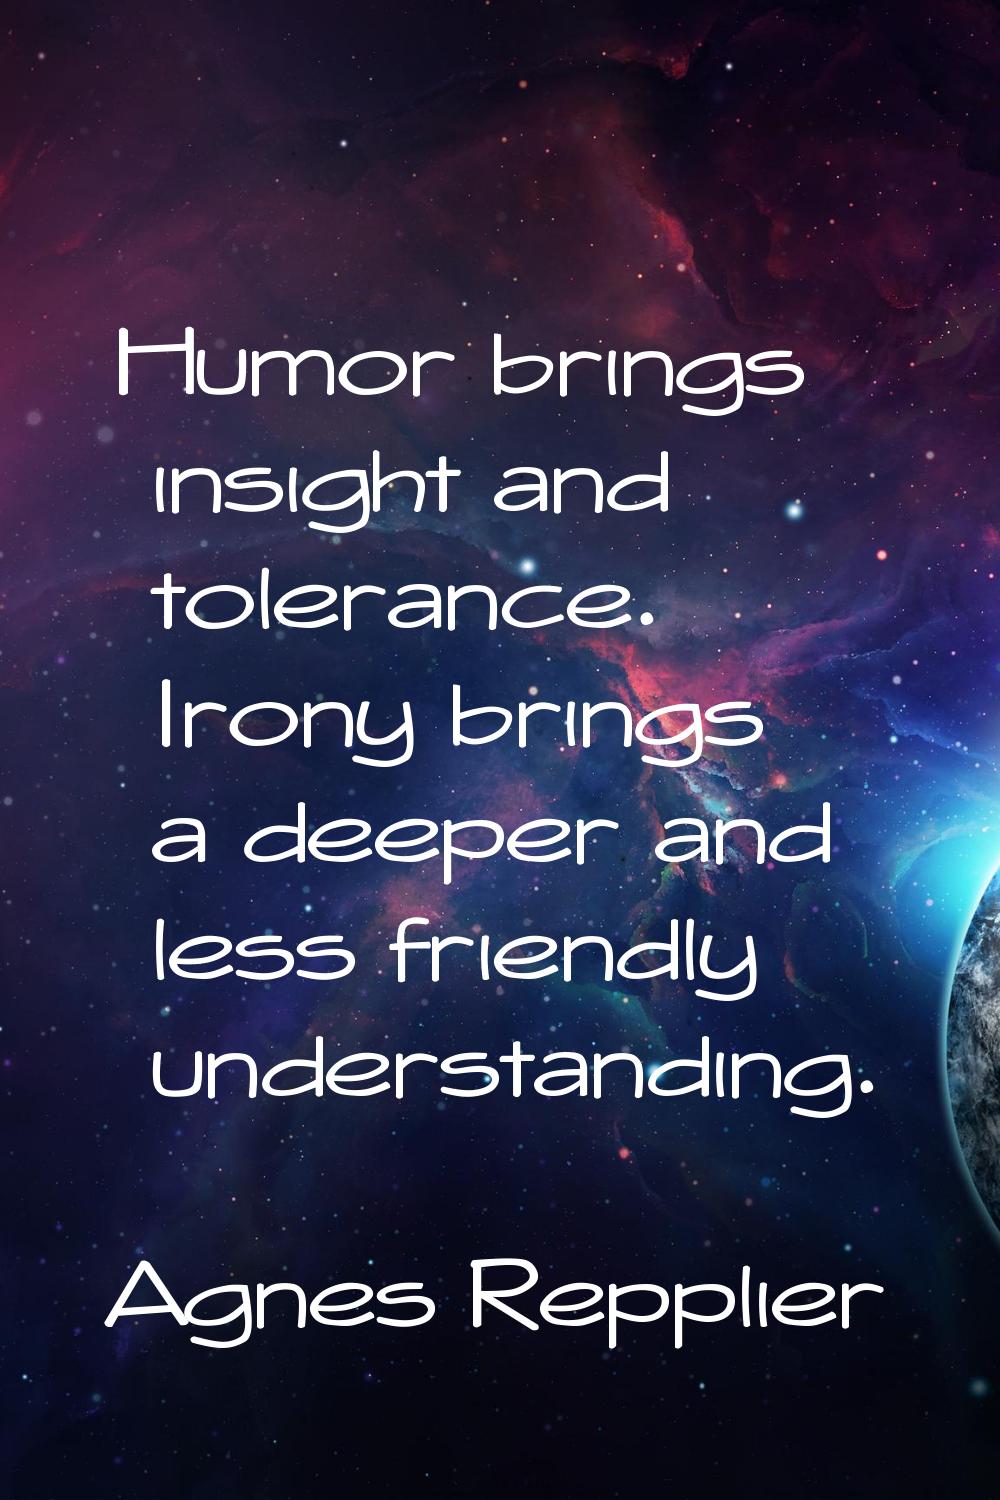 Humor brings insight and tolerance. Irony brings a deeper and less friendly understanding.